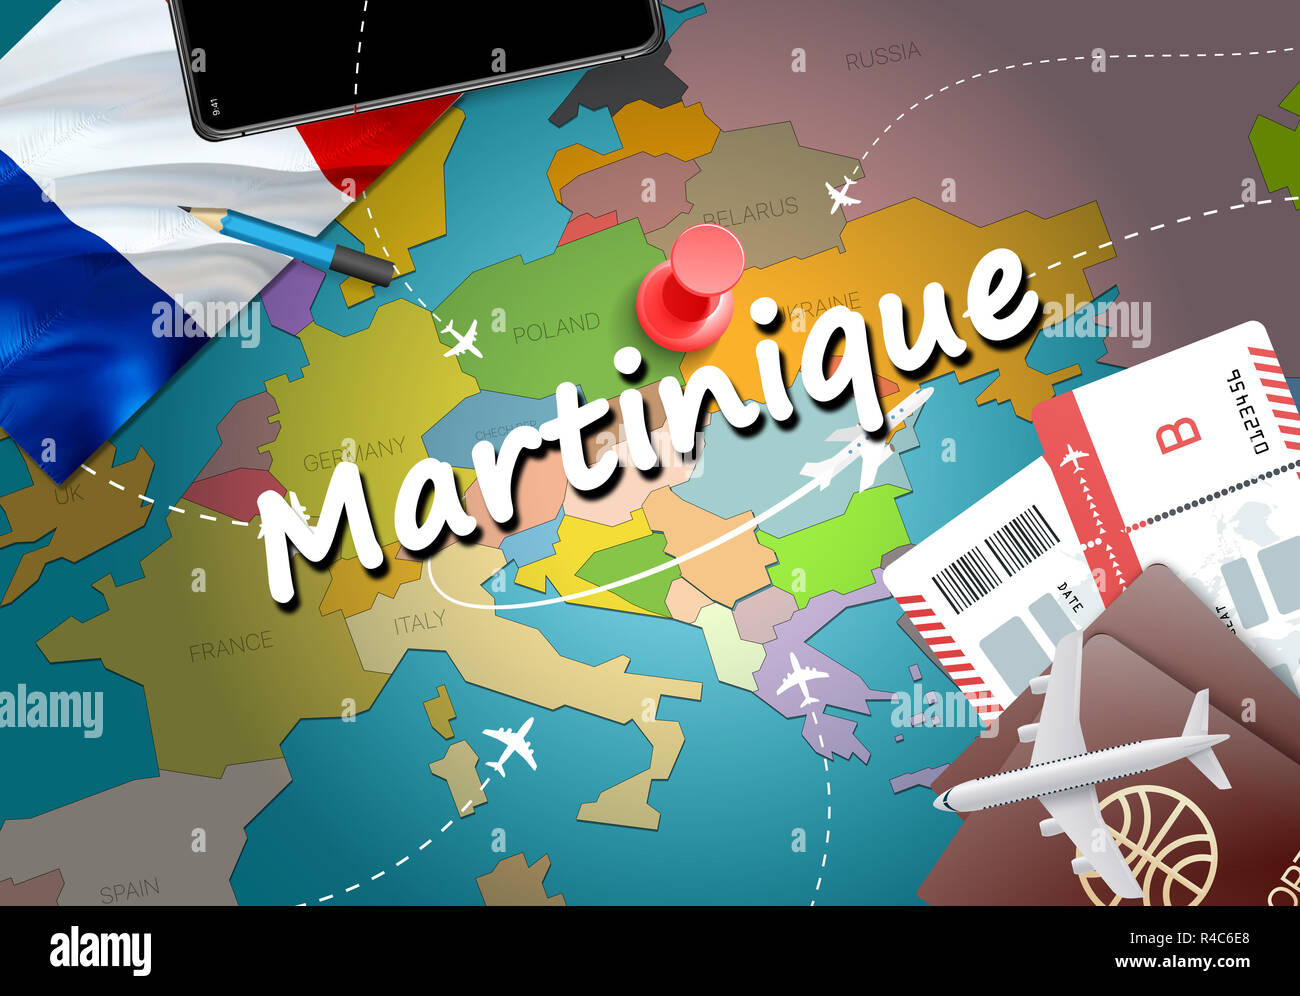 Martinique city travel and tourism destination concept. France flag and Martinique city on map. France travel concept map background. Tickets Planes a Stock Photo